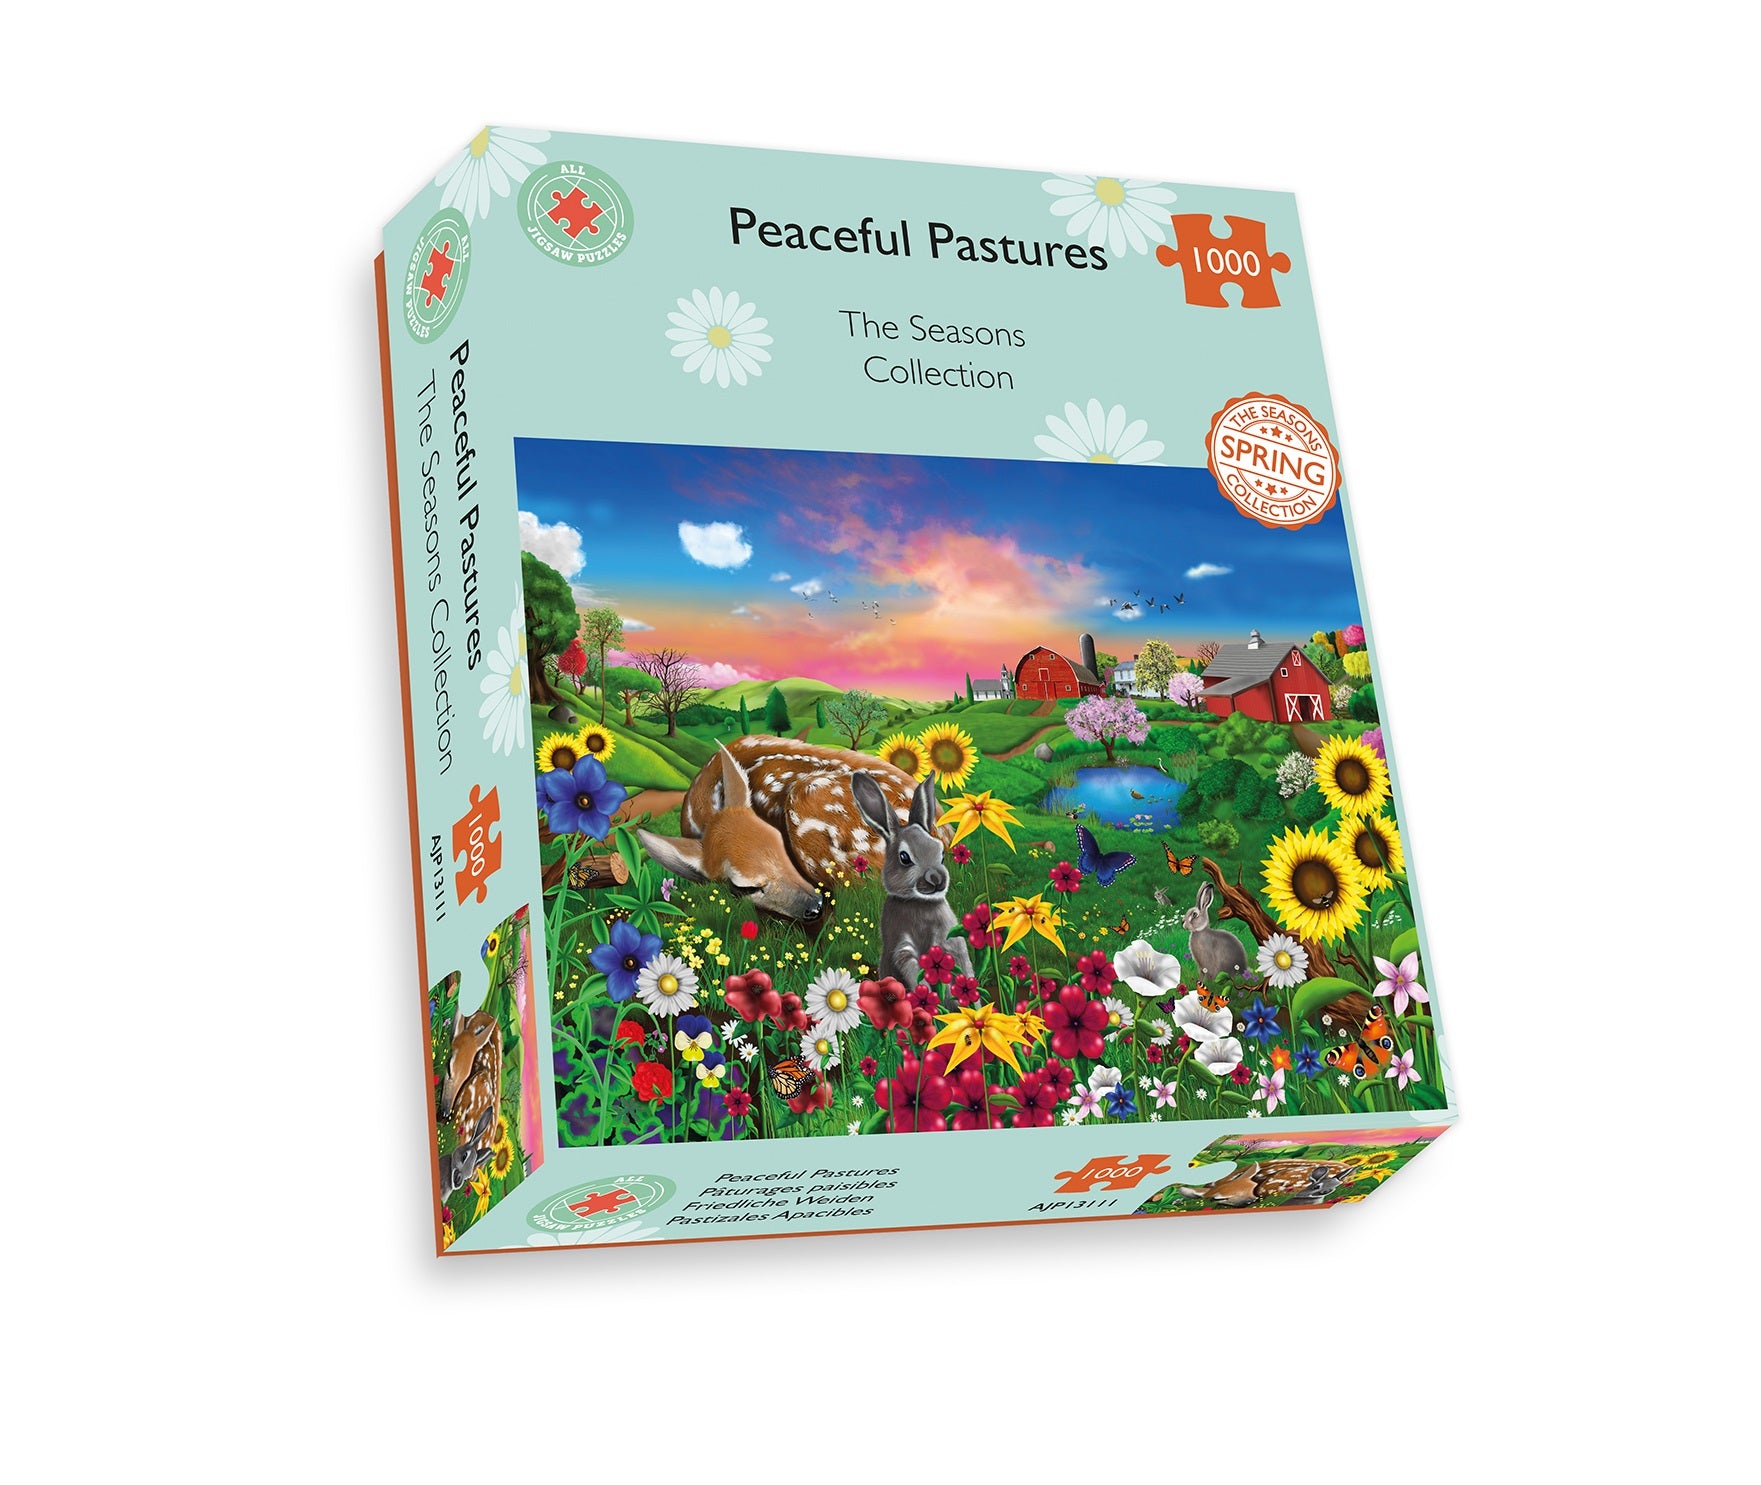 Peaceful Pastures 1000 or  500 Piece Jigsaw Puzzle box